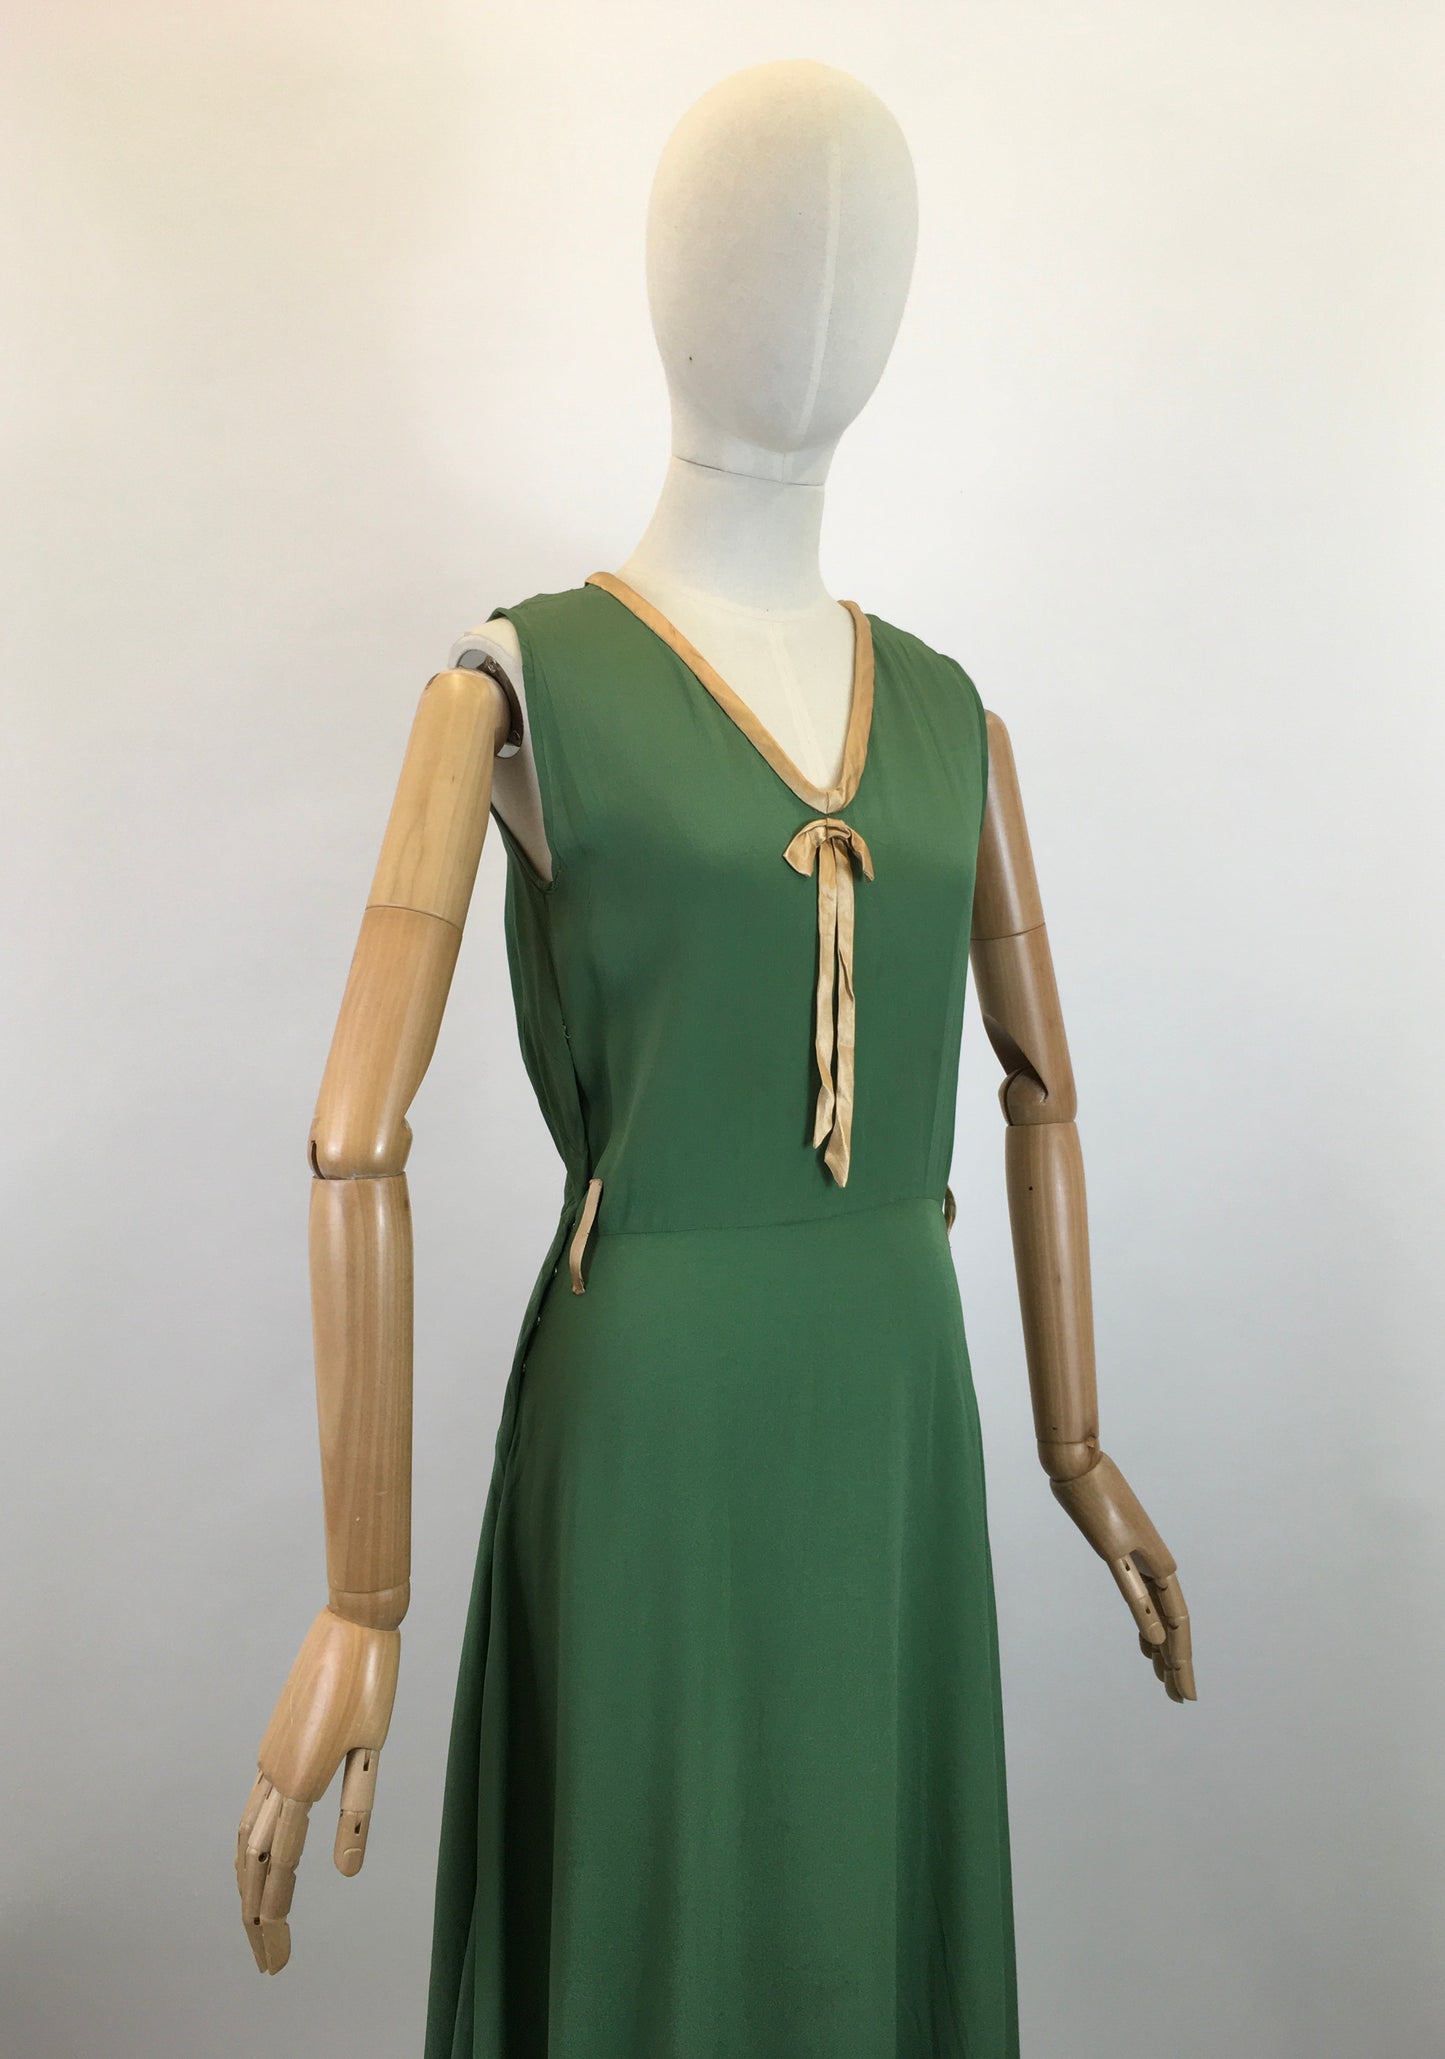 Original 1930's Darling Evening Dress - In Deco Green With Gold Trim